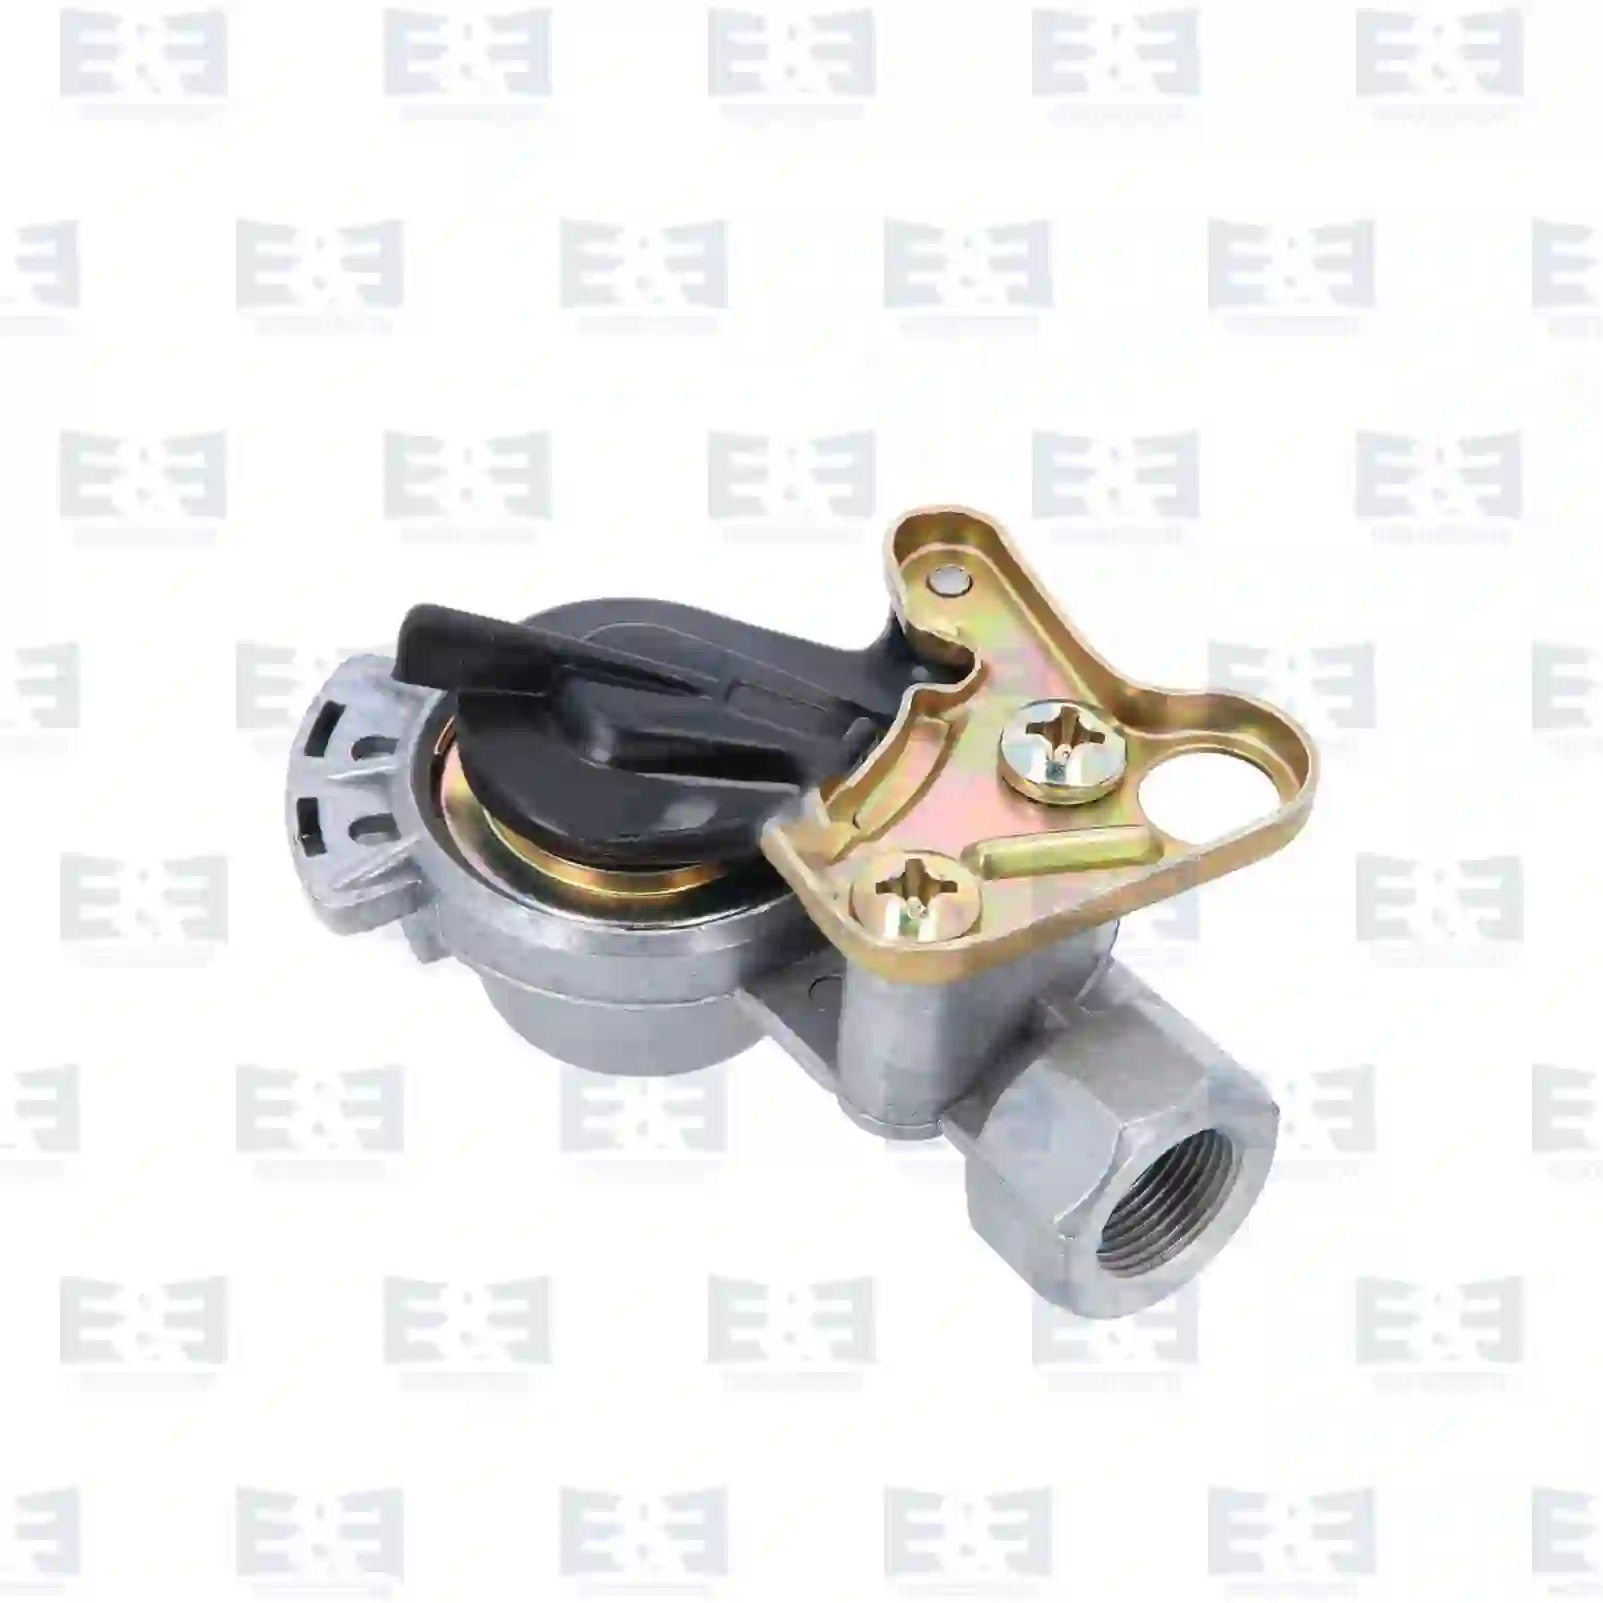 Compressed Air Palm coupling, black, with cover, EE No 2E2285672 ,  oem no:0560760, 560760, 02519877, 81512206090, 0004290239, 0004299930, 5000121713, 5021170151, 1010008, 8283056000 E&E Truck Spare Parts | Truck Spare Parts, Auotomotive Spare Parts